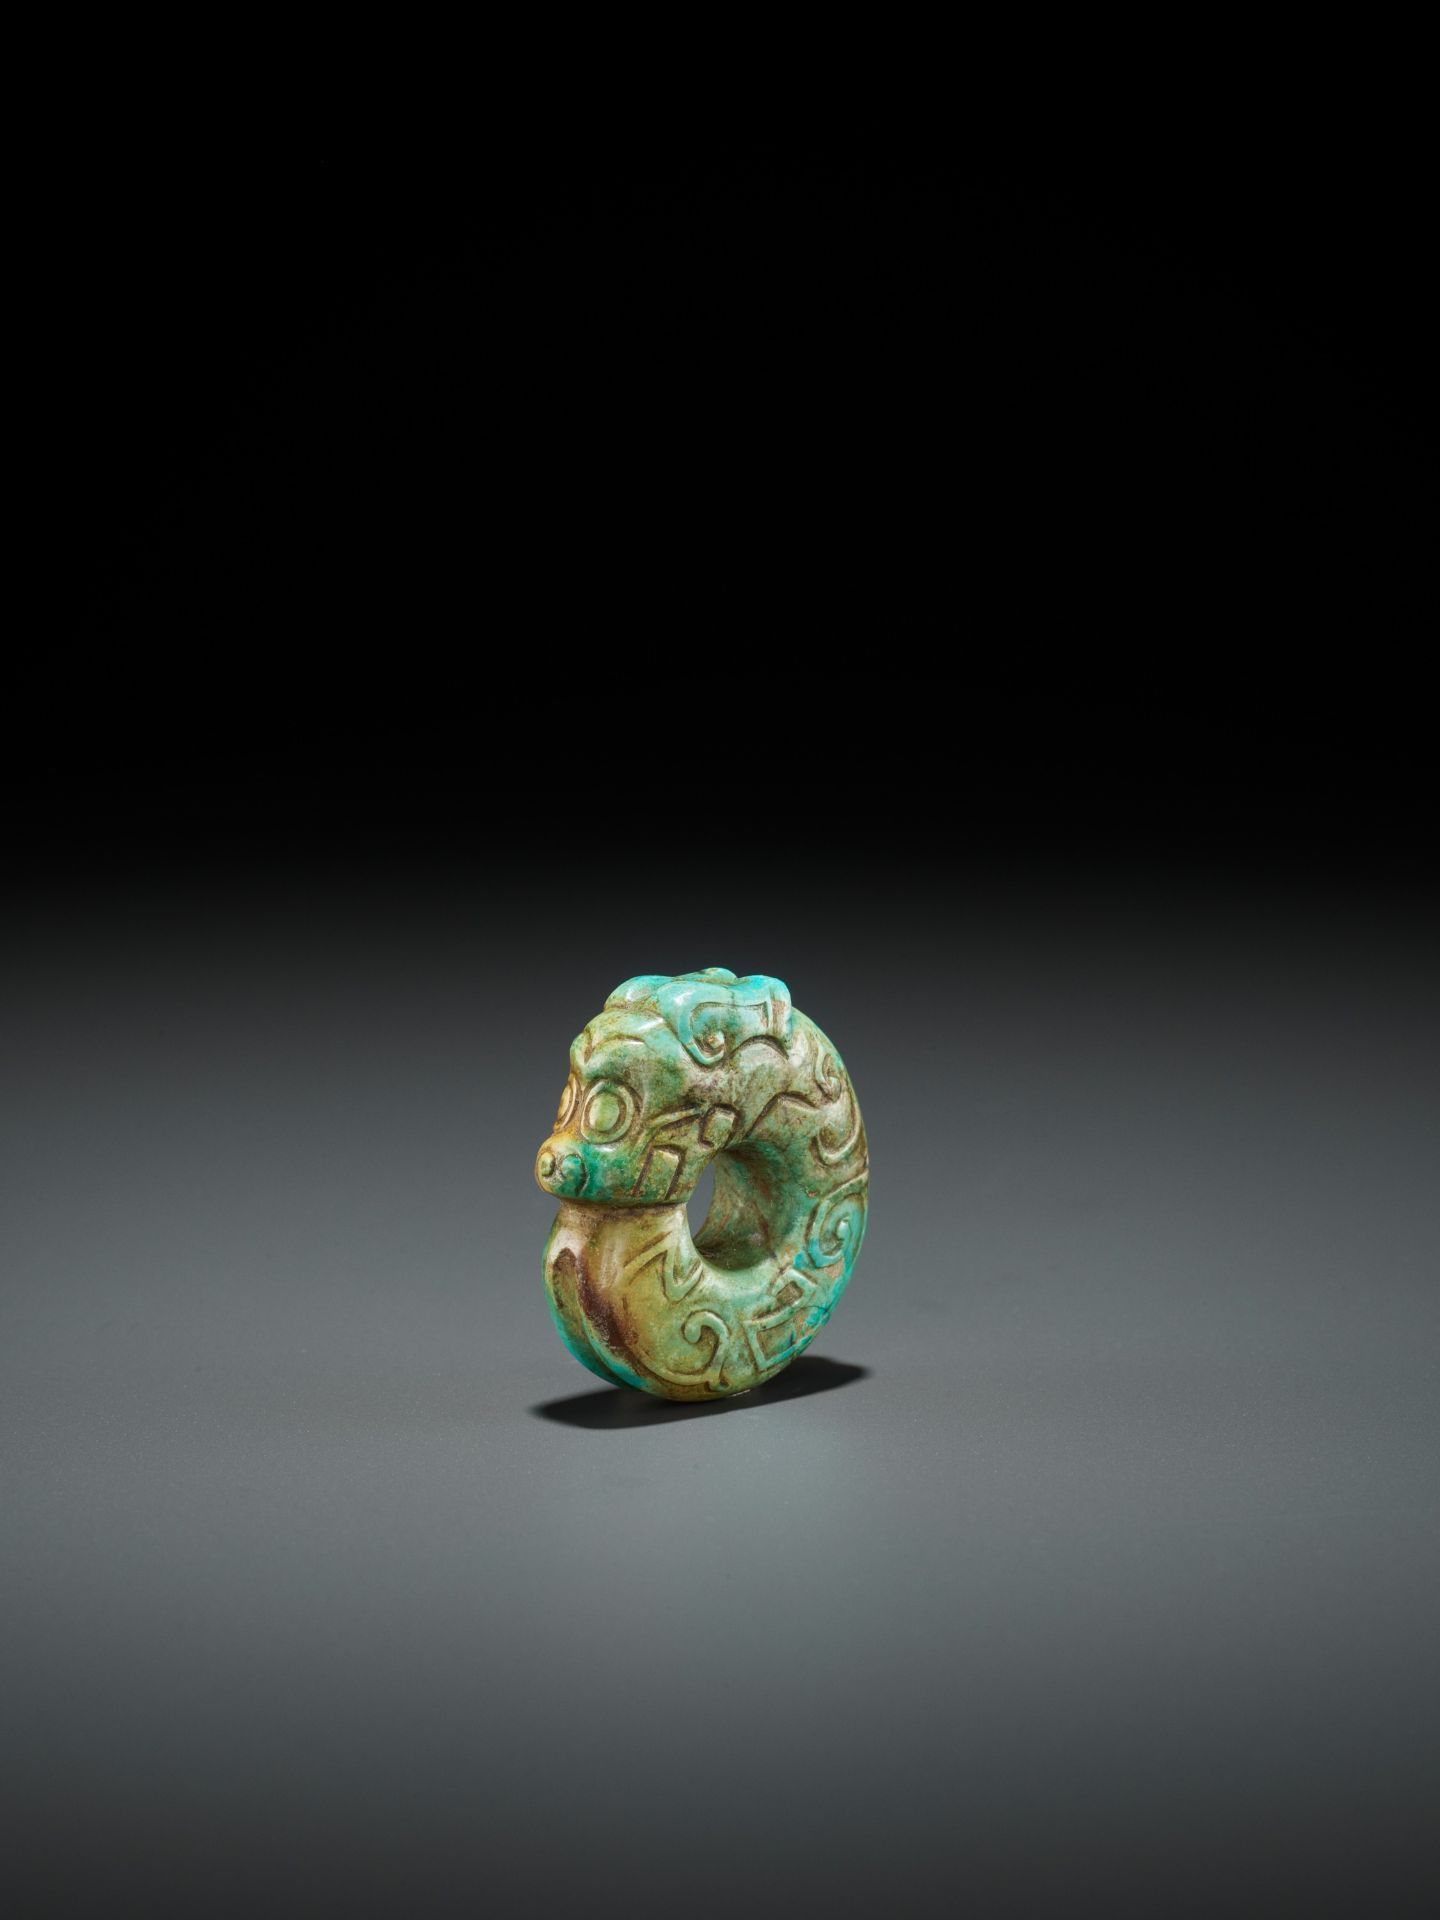 A TURQUOISE MATRIX 'PIG-DRAGON' PENDANT, SHANG TO WESTERN ZHOU DYNASTY - Image 10 of 14